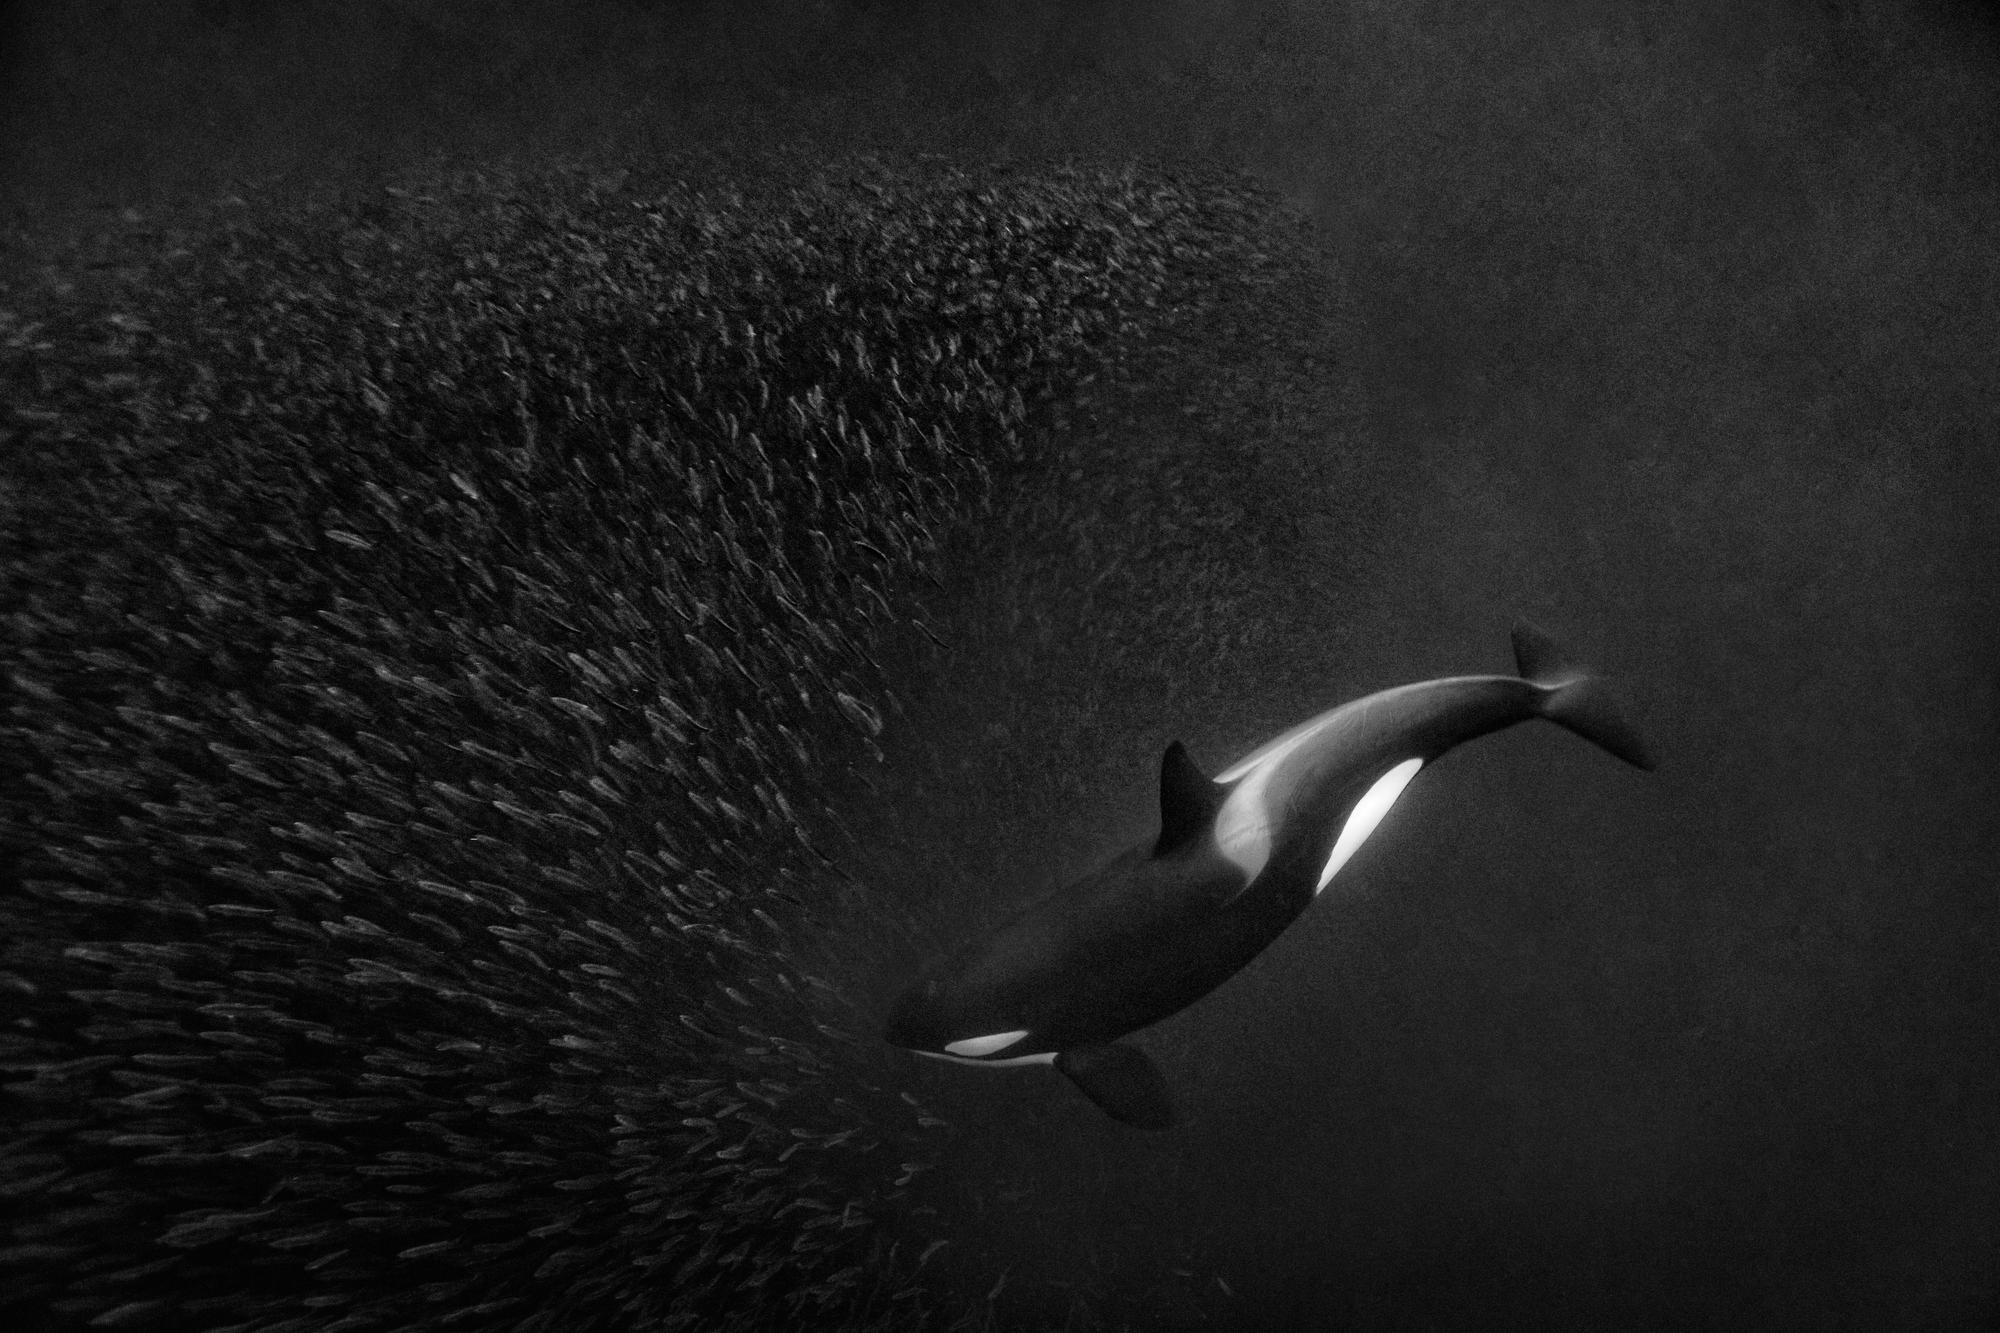 Paul Nicklen Black and White Photograph - Orca Ballet